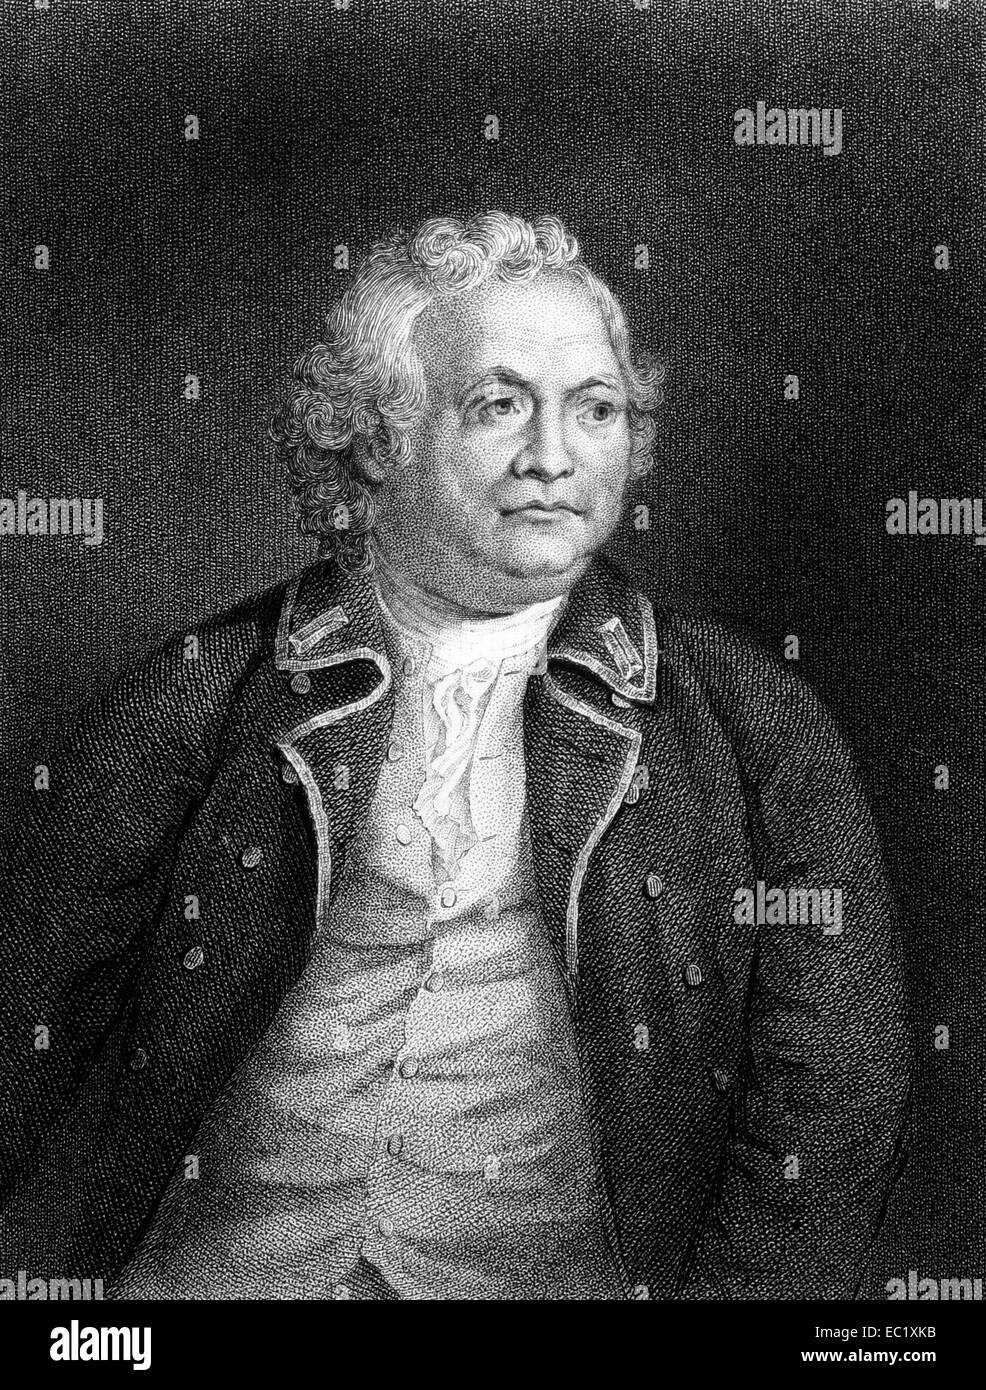 Israel Putnam (1718-1790) on engraving from 1834. American army general officer and Freemason. Stock Photo